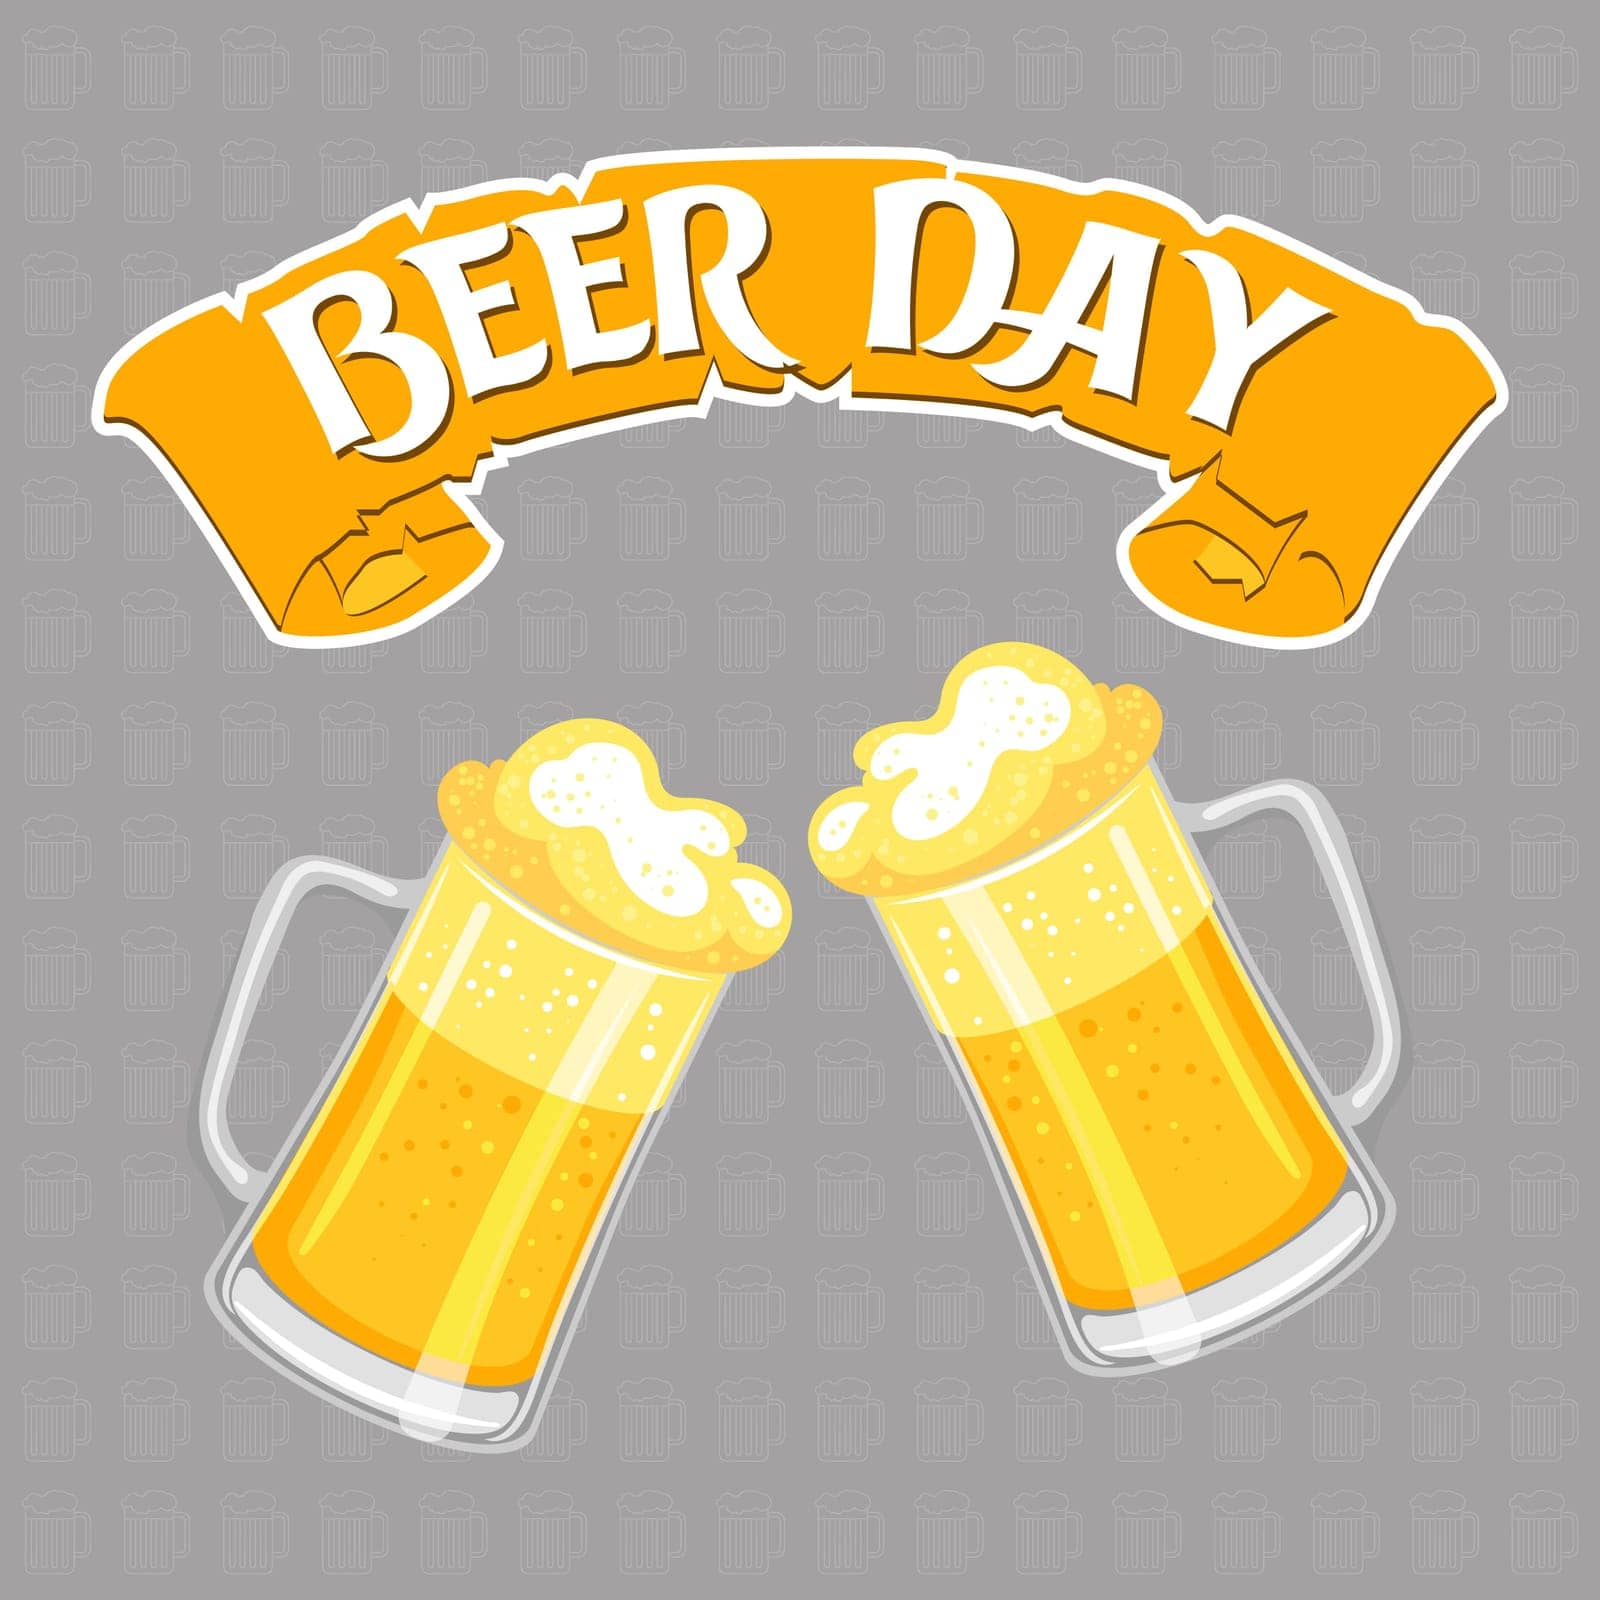 Beer day. Glass mugs with foamy beer. Drink. Illustration, vector